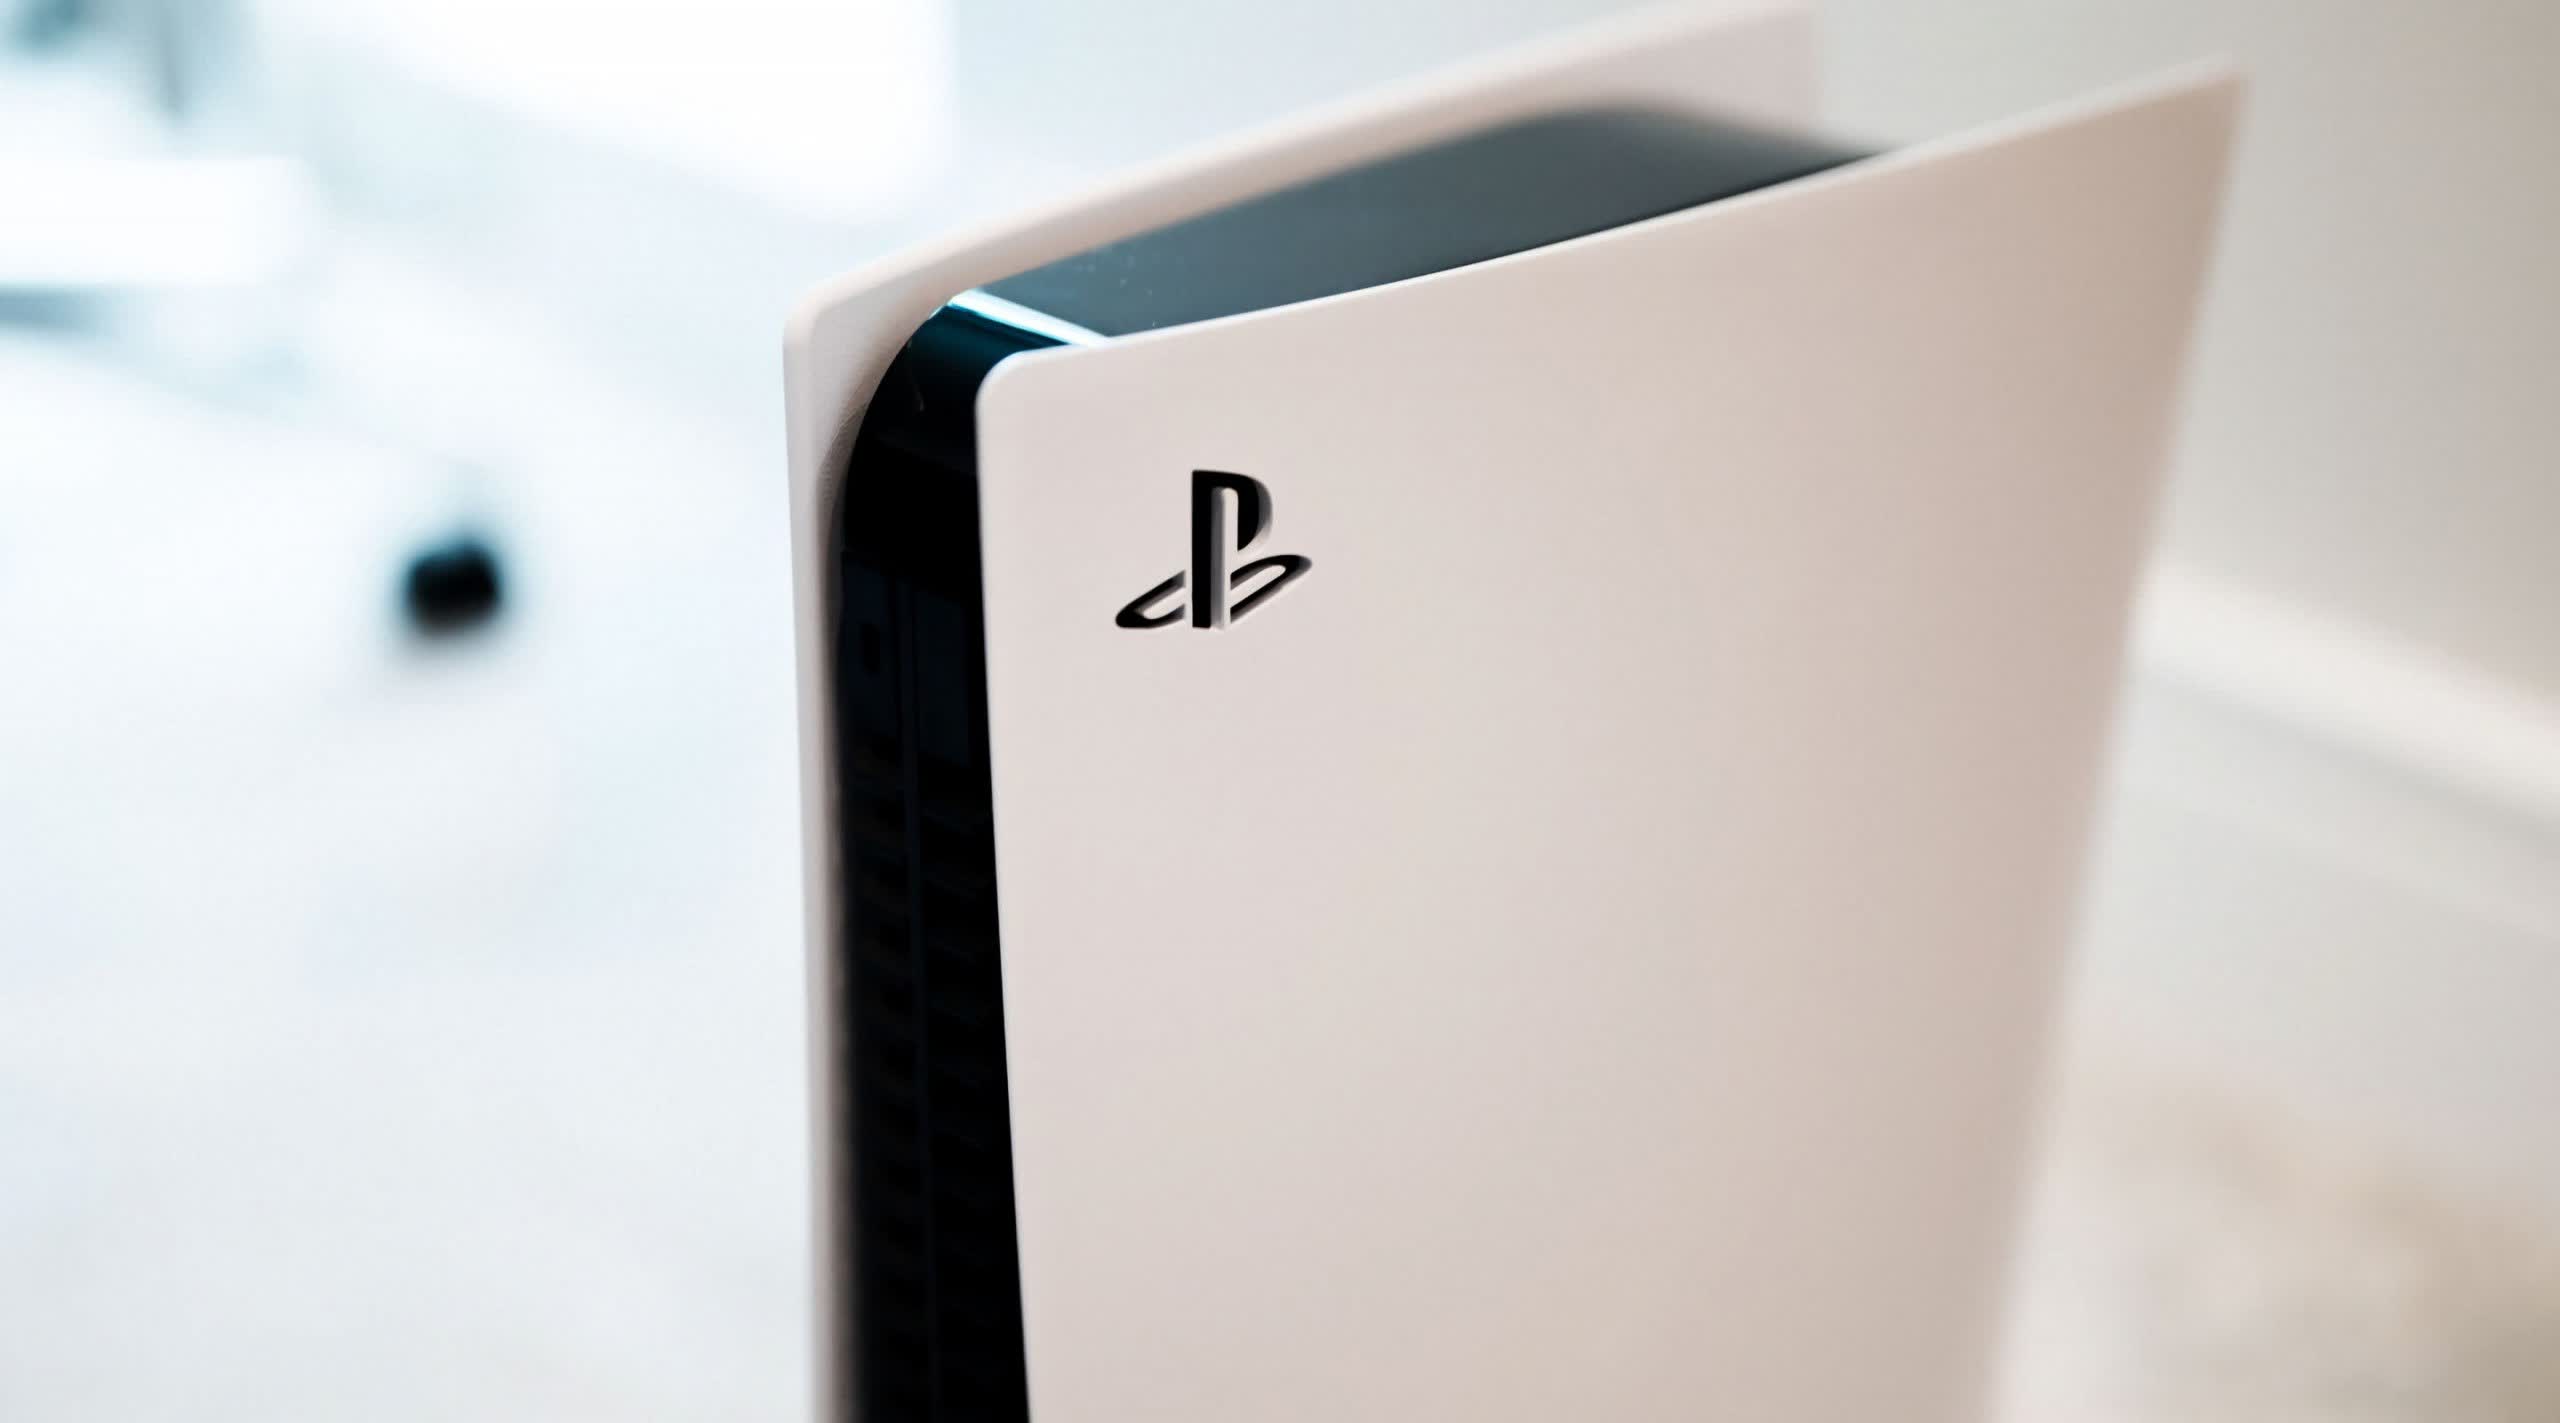 Insiders claim Sony will accelerate PS5 production in 2021 to meet demand